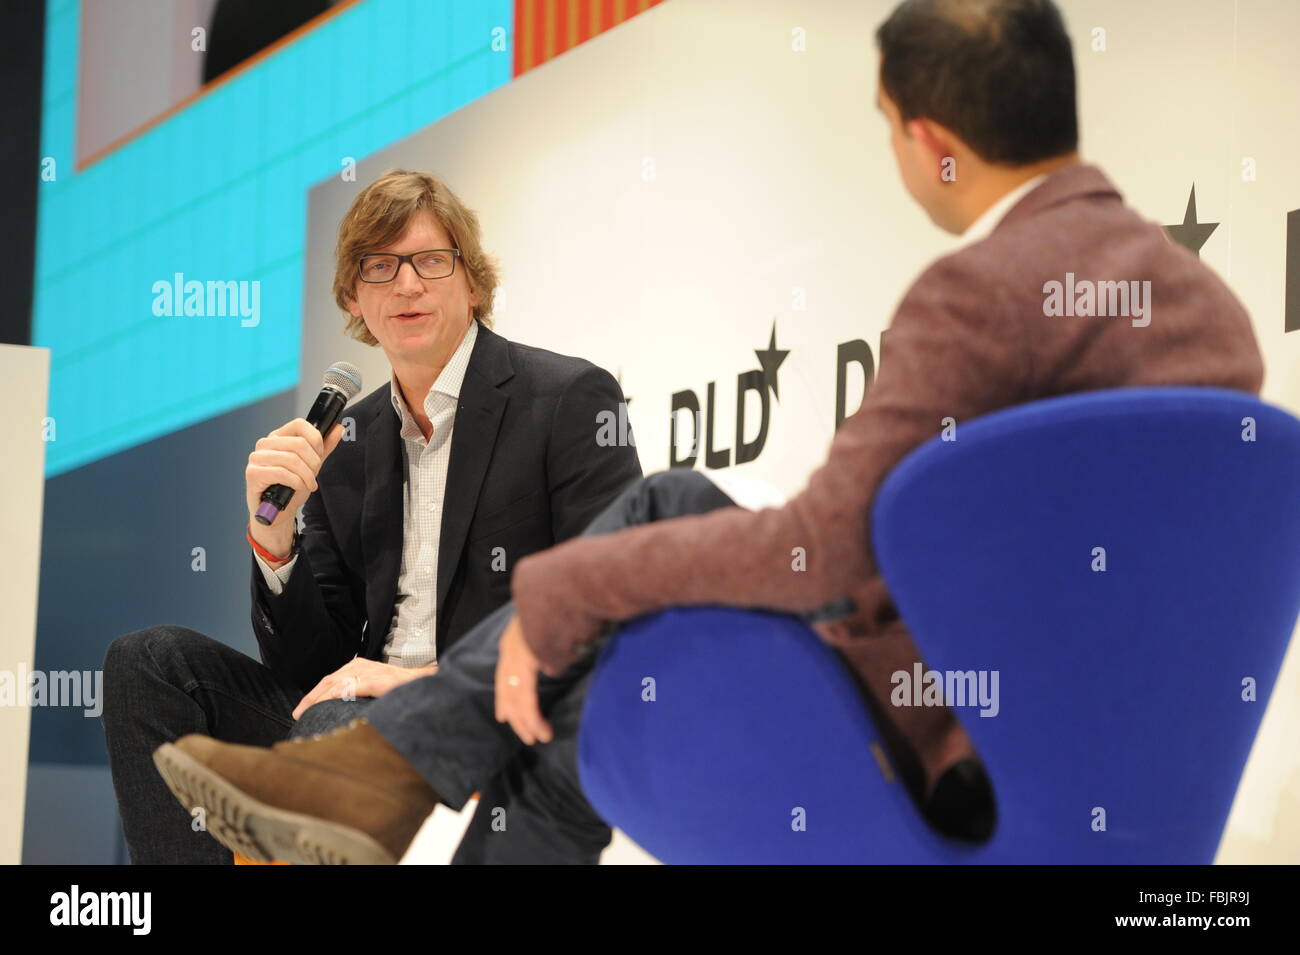 MUNICH/GERMANY - JANUARY 17: Niklas Zennström (Atomico) speaks on a panel discussion during the DLD16 (Digital-Life-Design) Conference at the HVB Forum on January 17, 2016 in Munich, Germany. DLD is a global network of innovation, digitization, science and culture, which connects business, creative and social leaders, opinion formers and influencers for crossover conversation and inspiration.(Photo: picture alliance / Jan Haas) Stock Photo